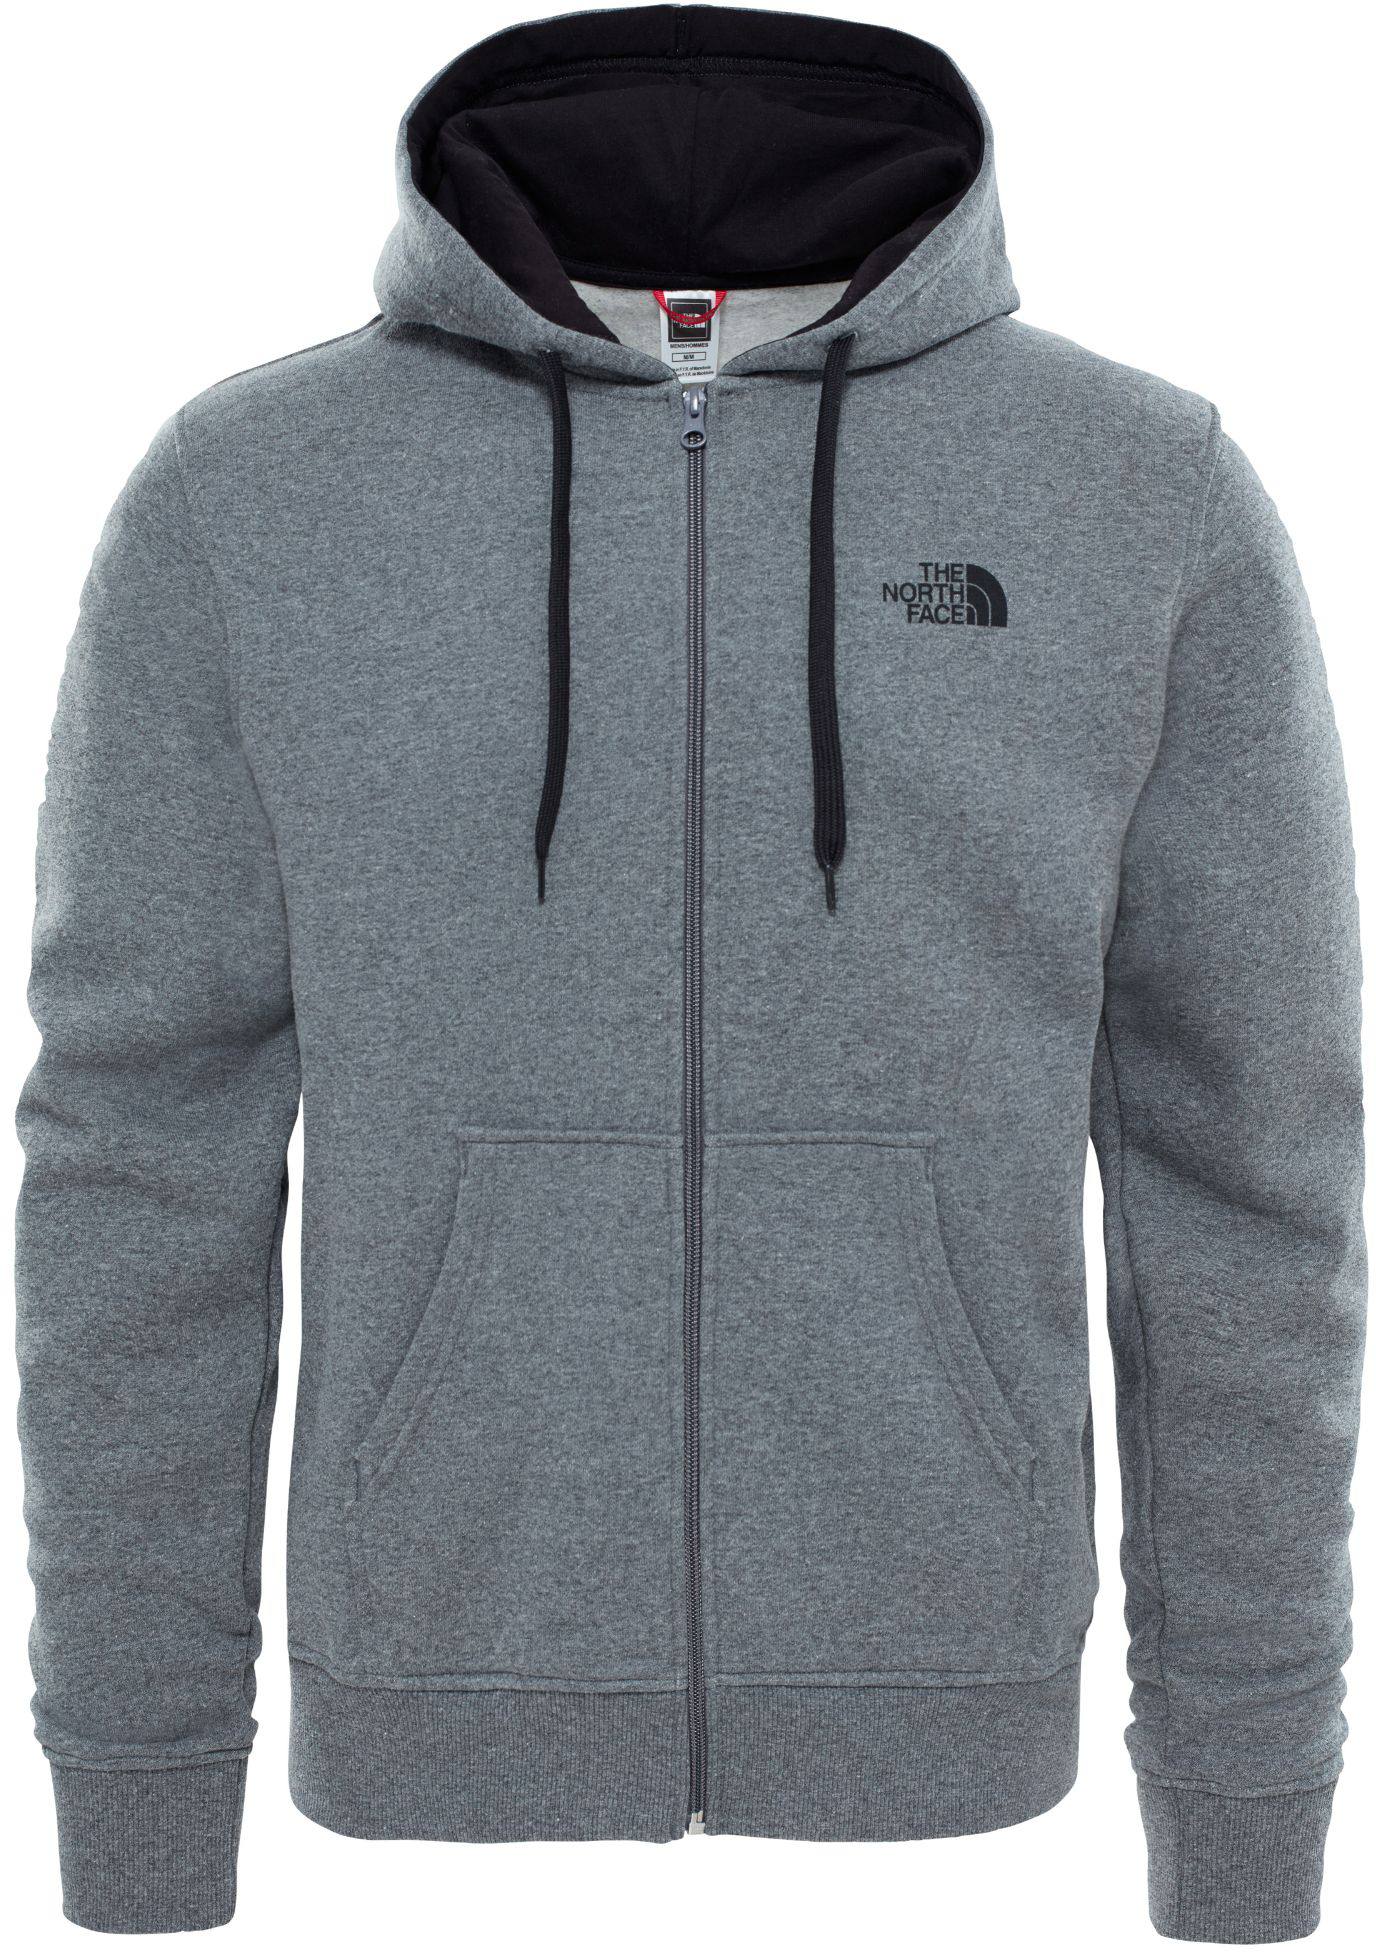 The North Face Open Gate Full Zip Hoodie Grey XL